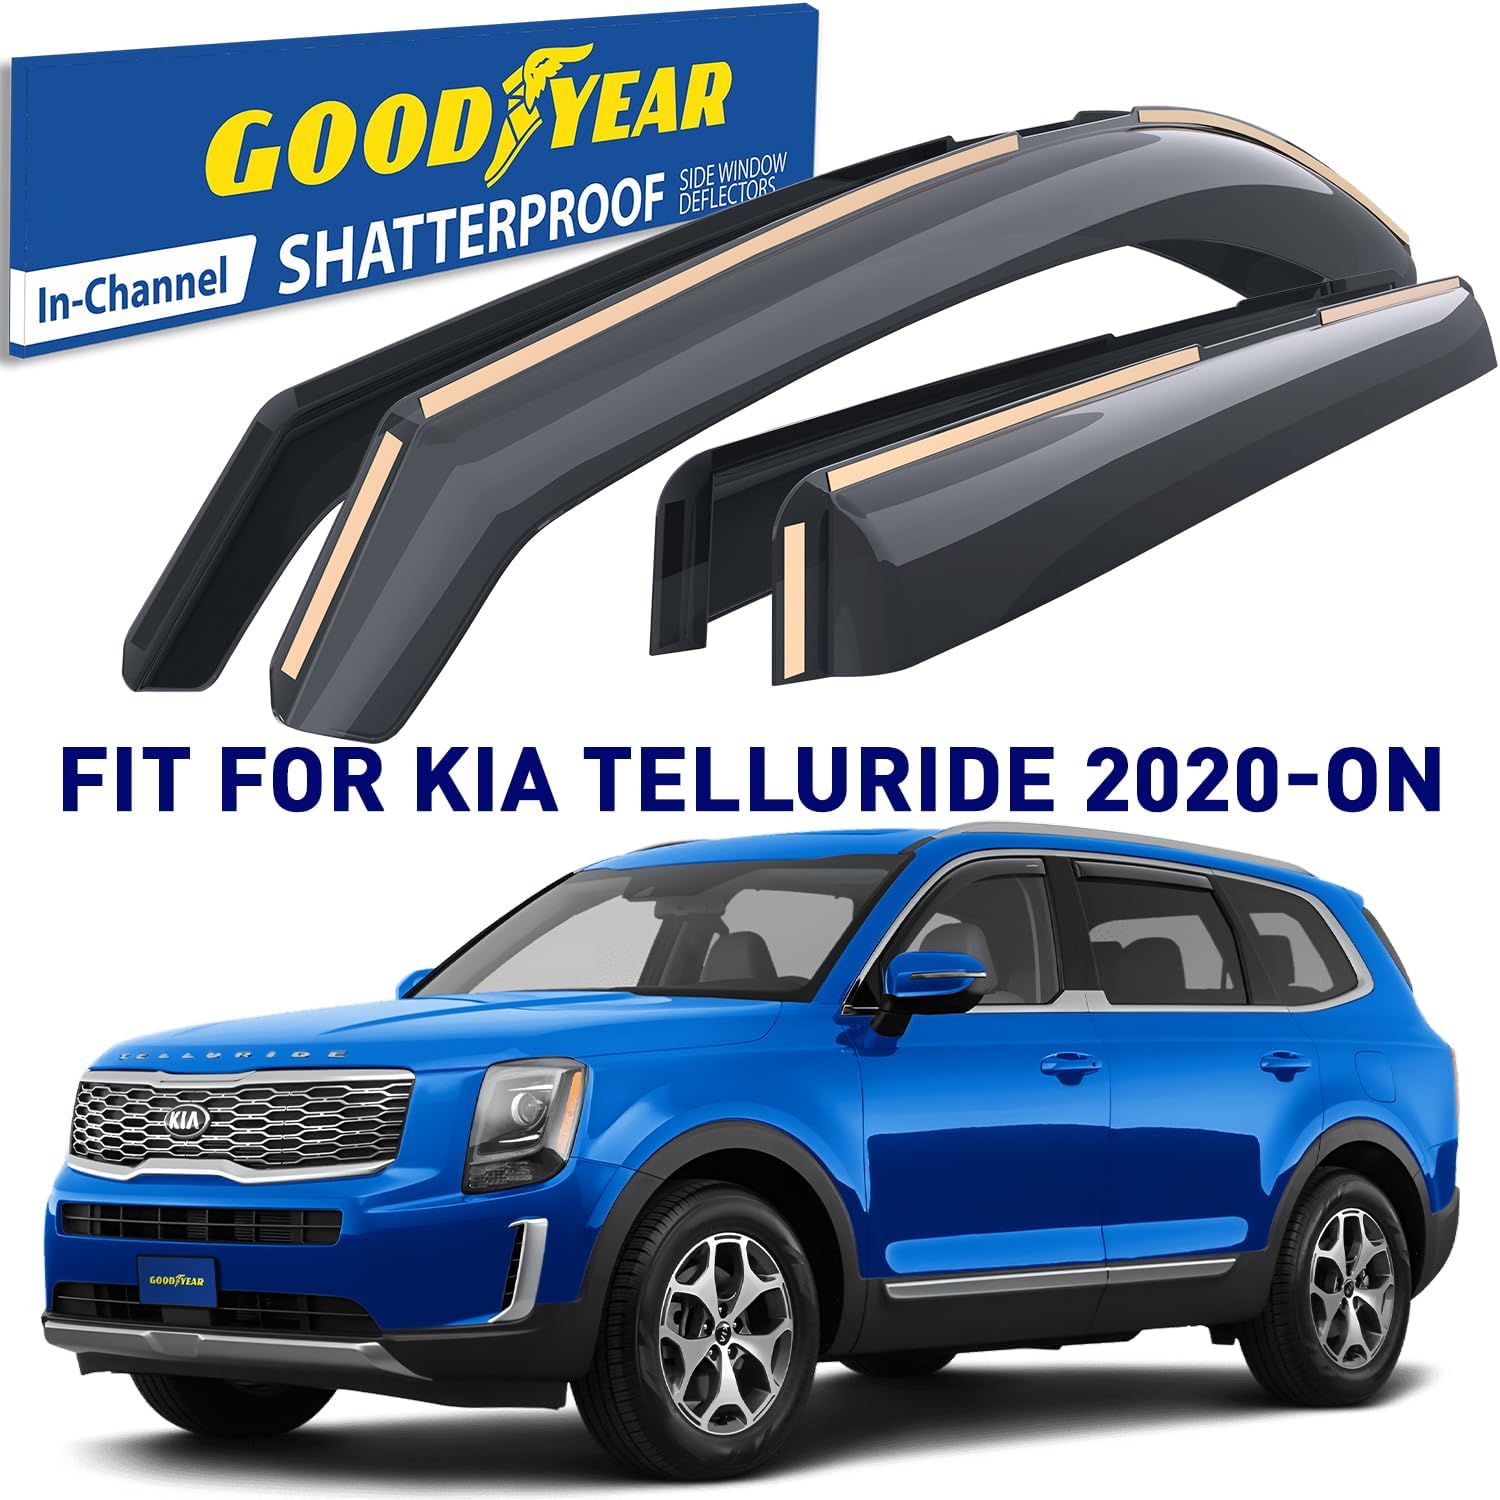 Goodyear Shatterproof in-Channel Window Deflectors for Kia Telluride 2020-2024, Rain Guards, Window Visors for Cars, Vent Deflector, Car Accessories, 4 pcs - GY007917